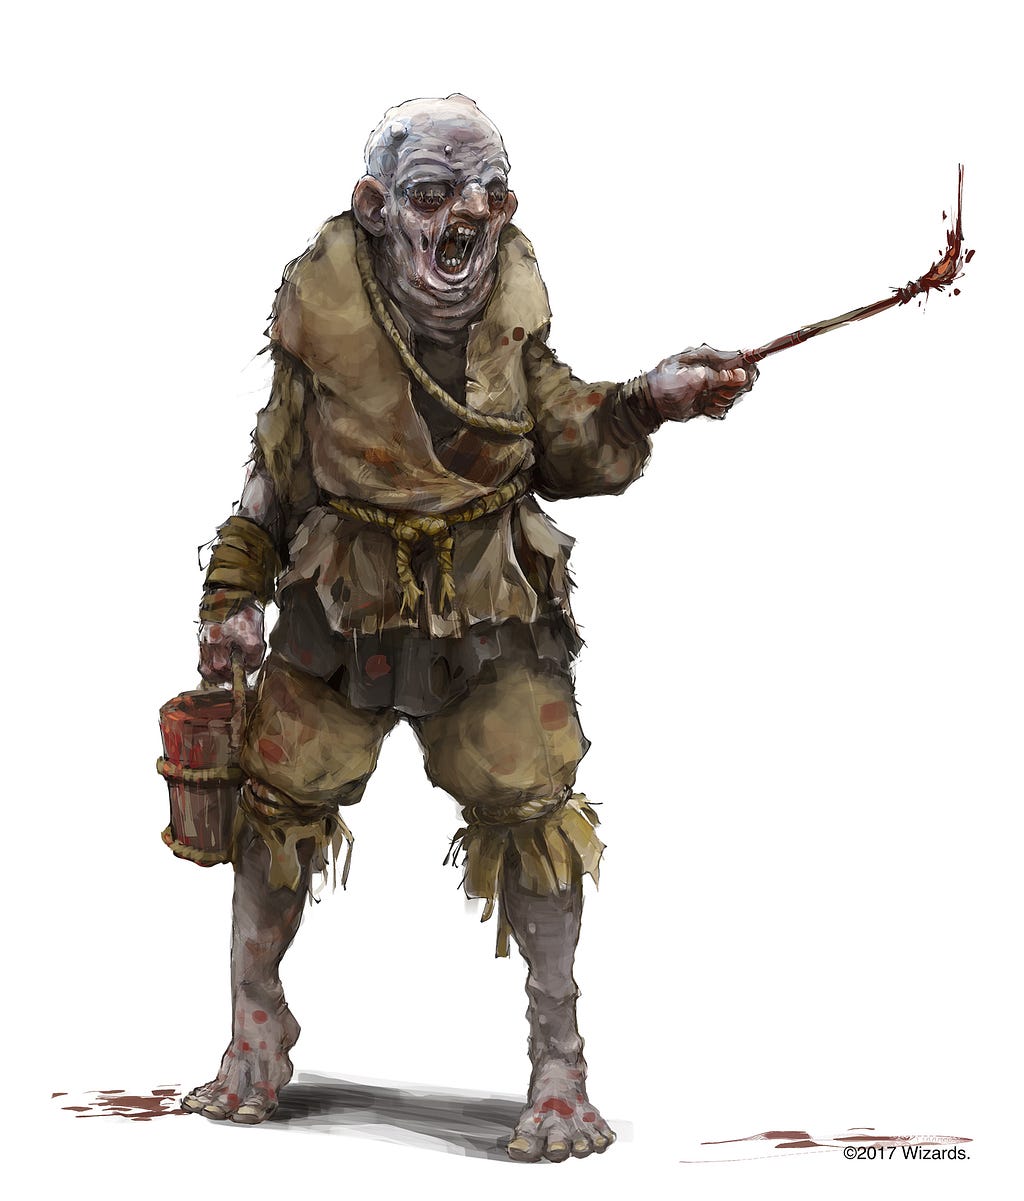 An undead man in rags with his eyes sewn shut holding a paintbrush.